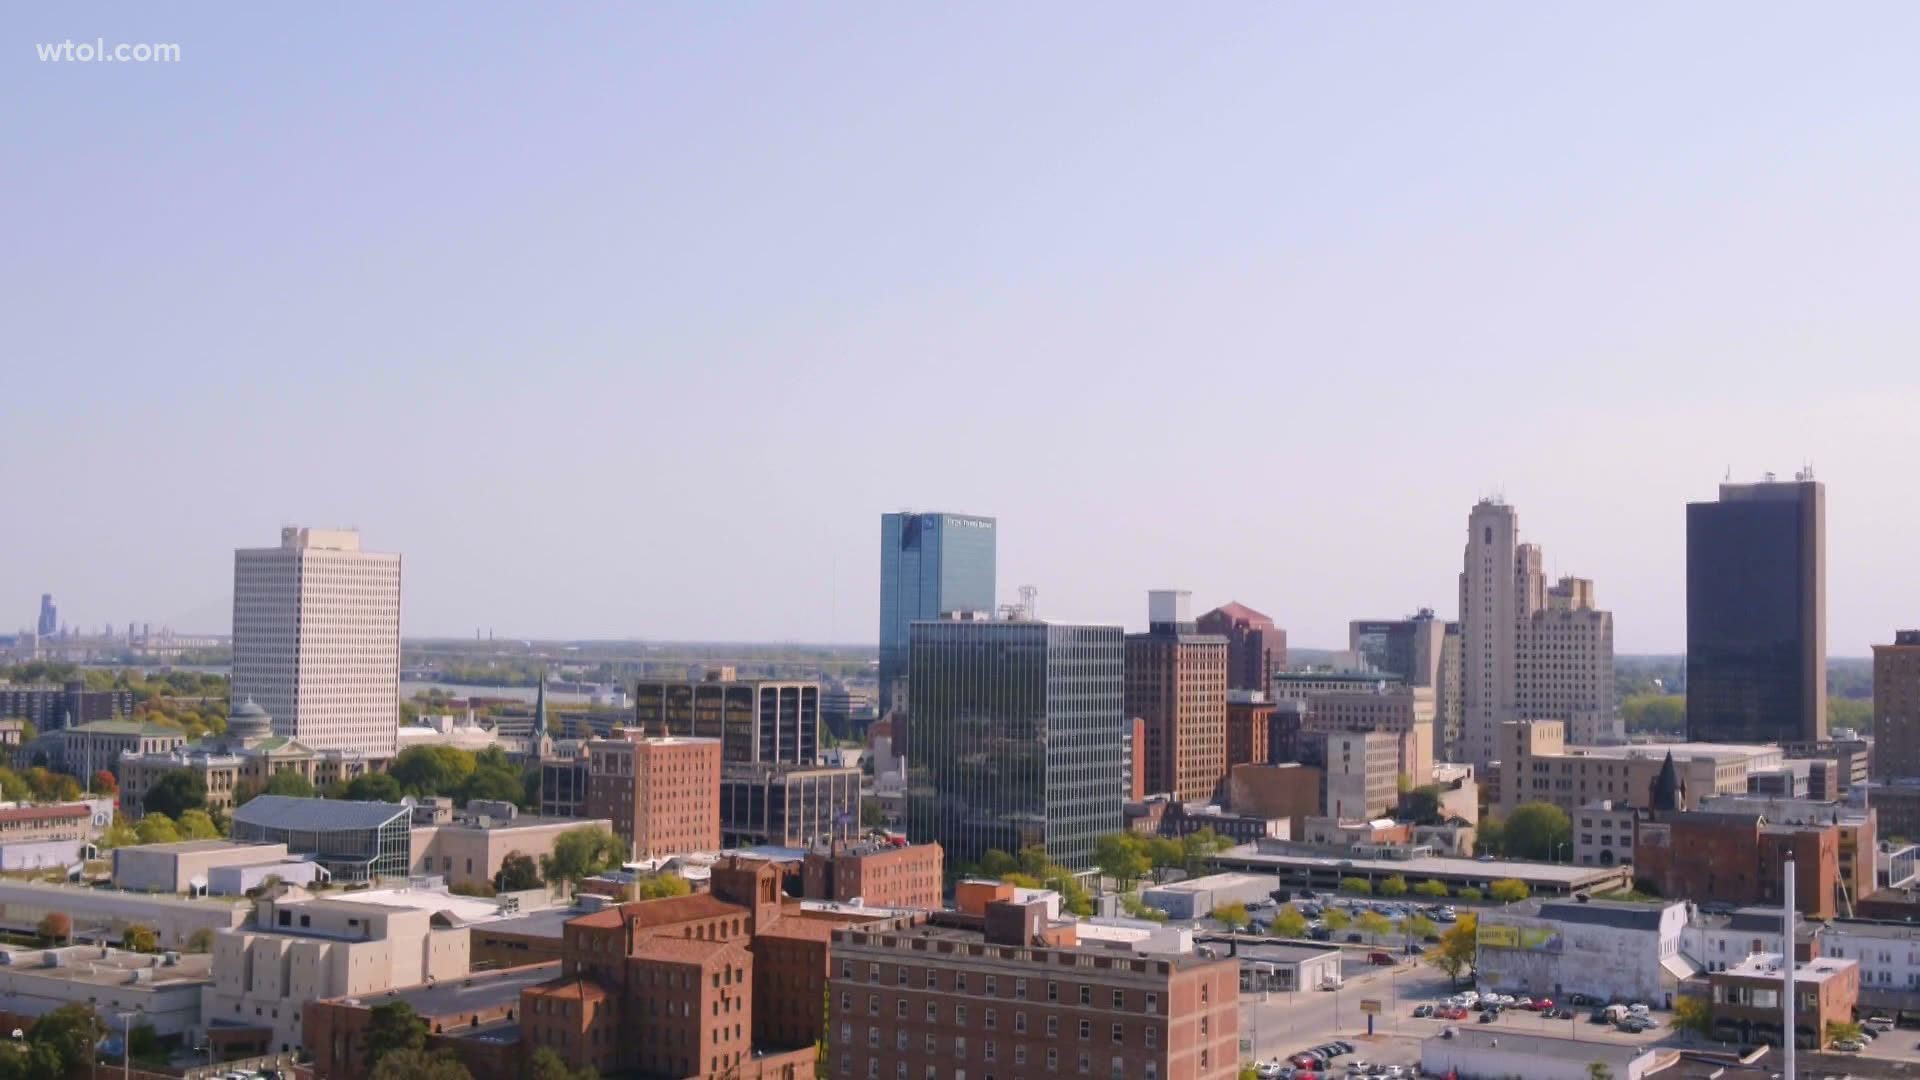 A new report by AdvisorSmith ranks several cities as perfect places to retire. Toledo's close to the top of the list.